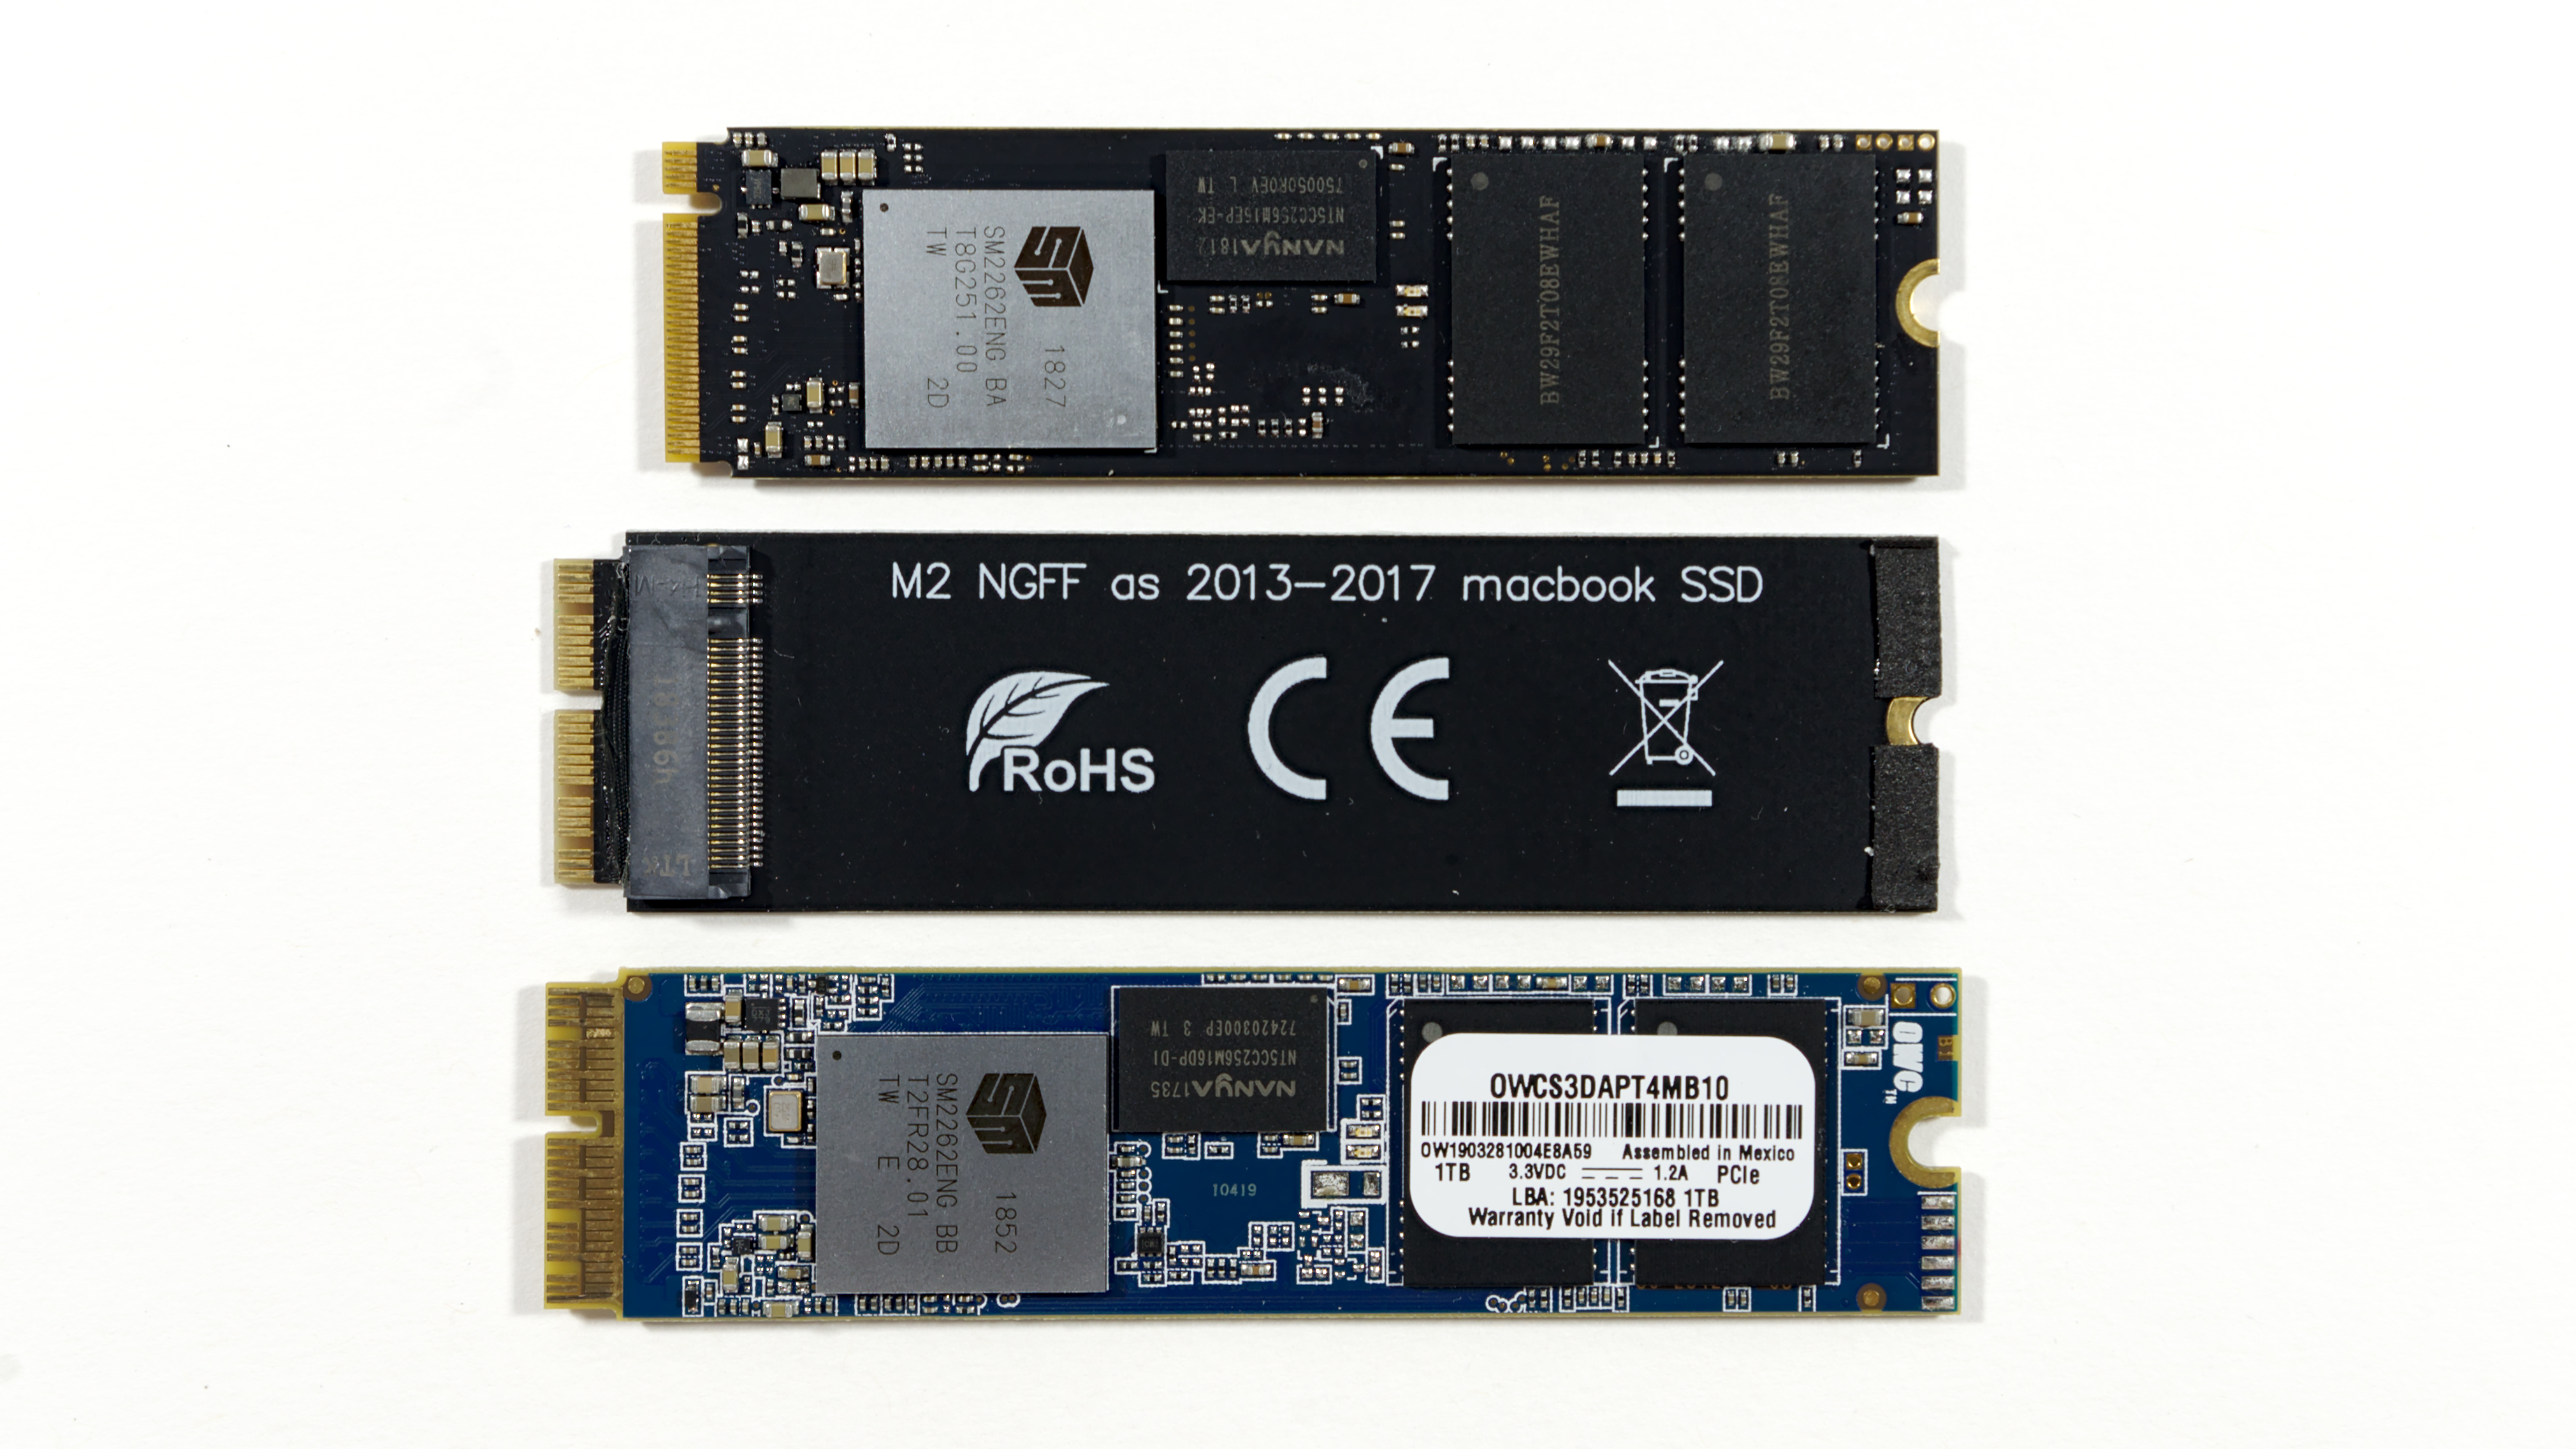 The OWC Aura Pro X2 SSD Review: An NVMe Upgrade For Older Macs